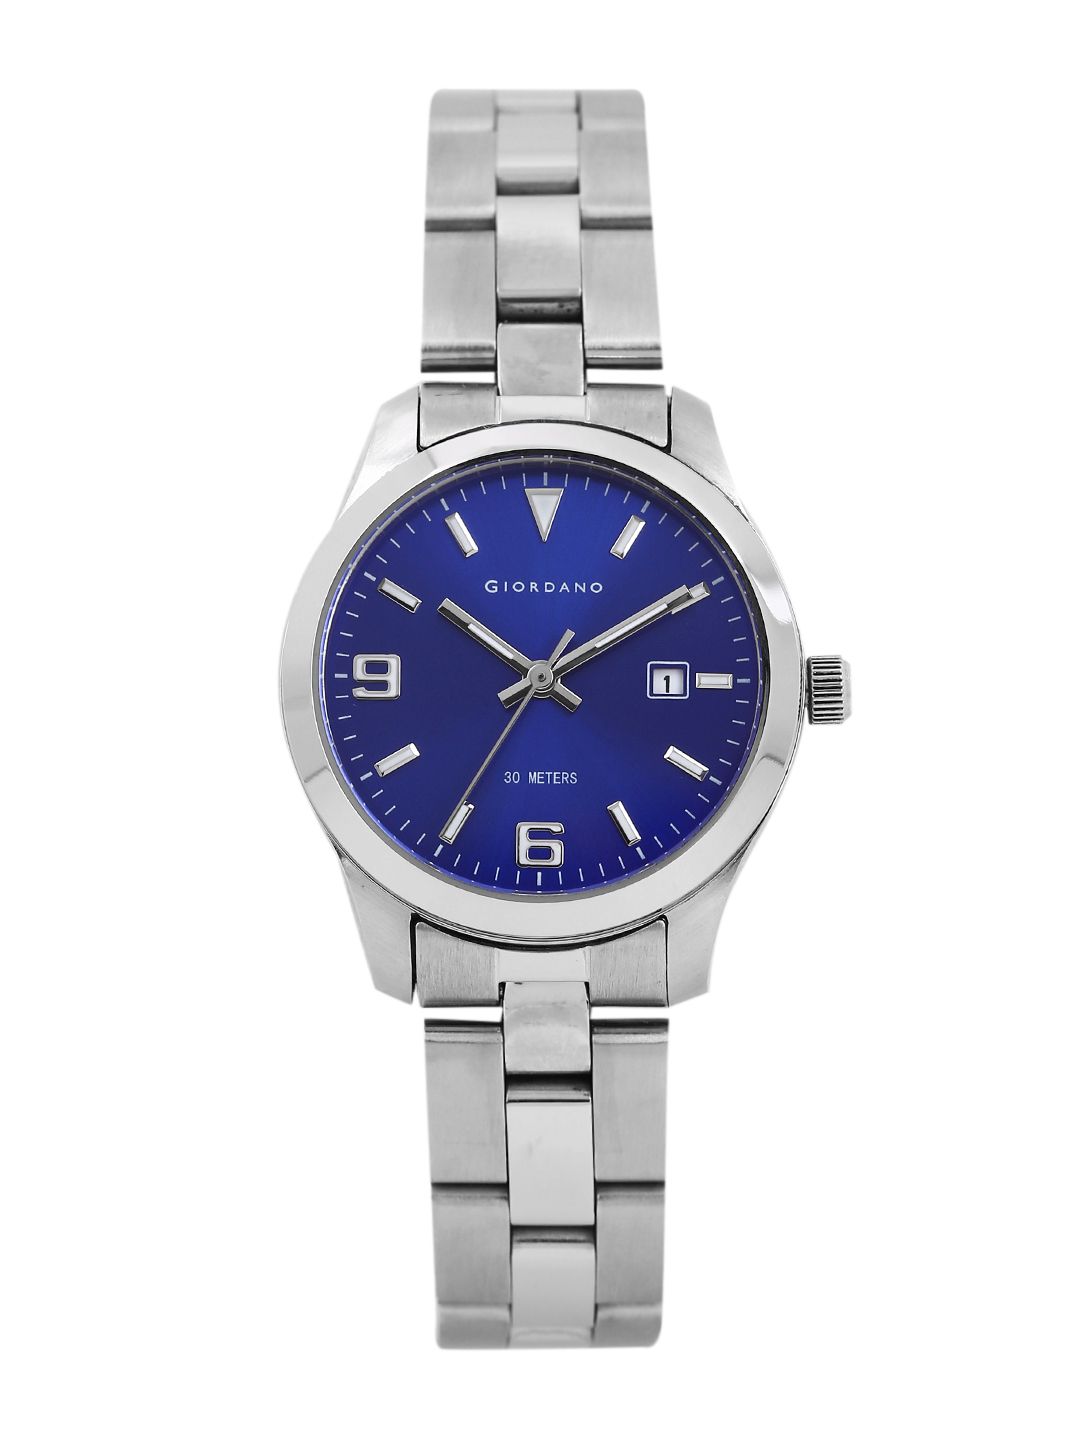 GIORDANO Women Blue Analogue Watch P2061-33 Price in India